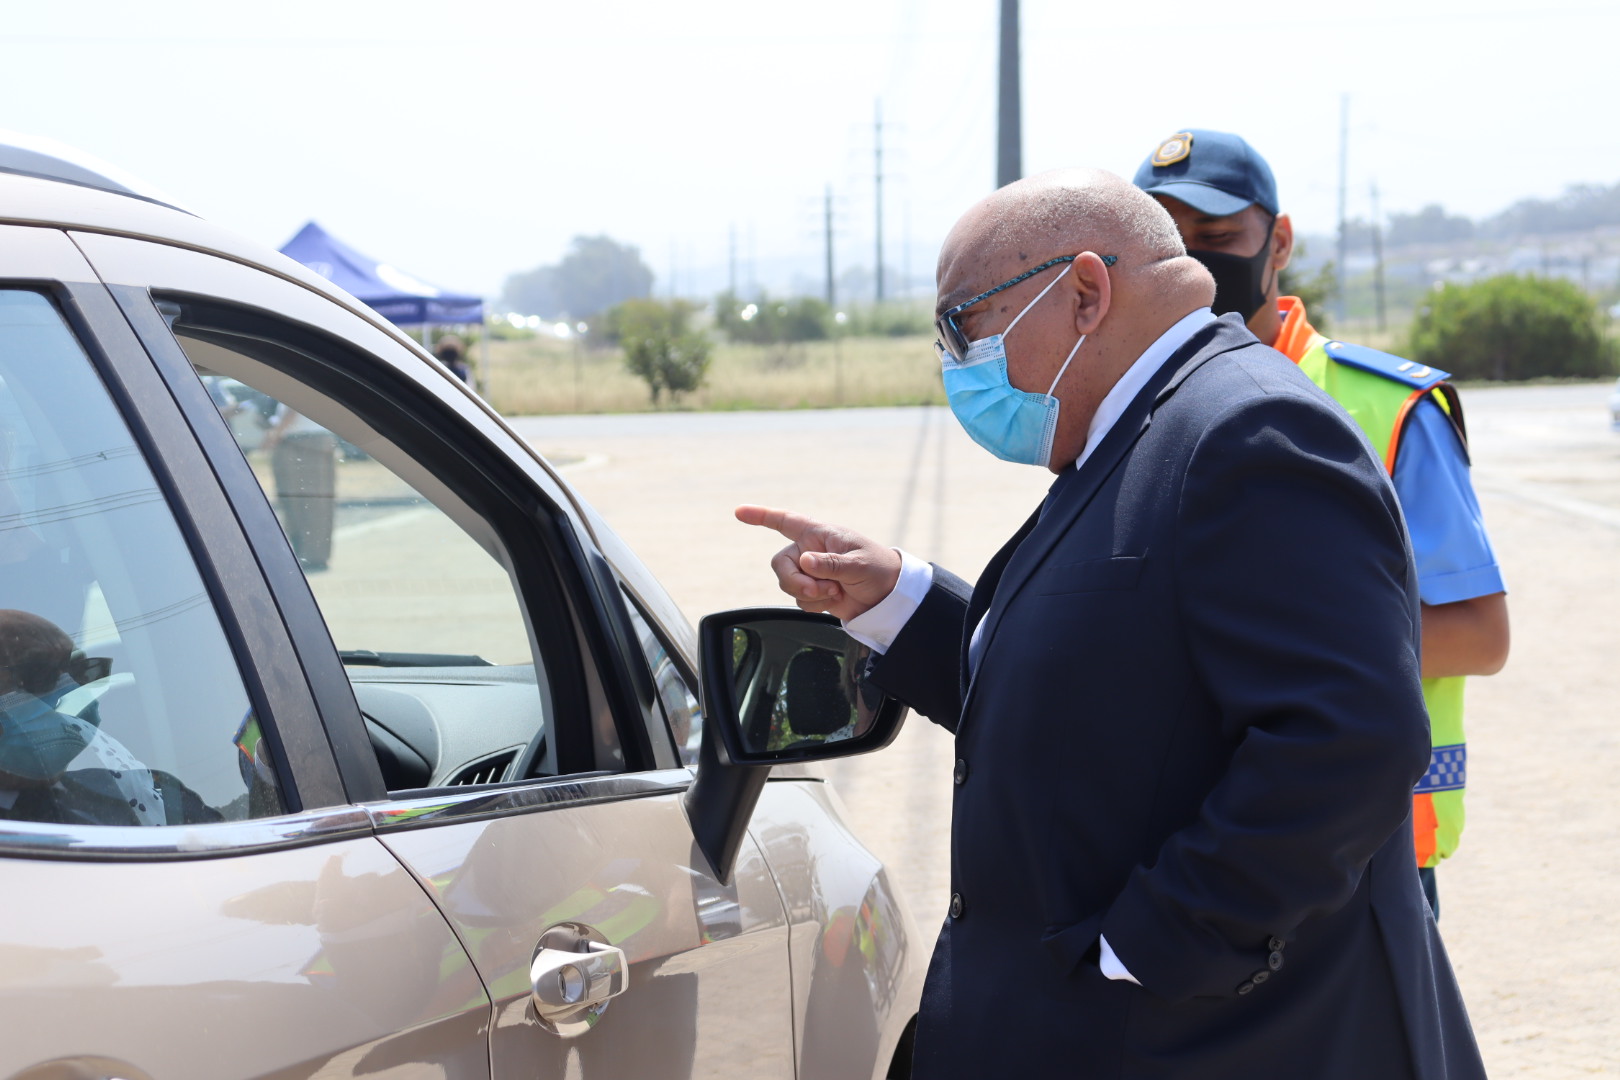 Minister Fritz interacting with motorists